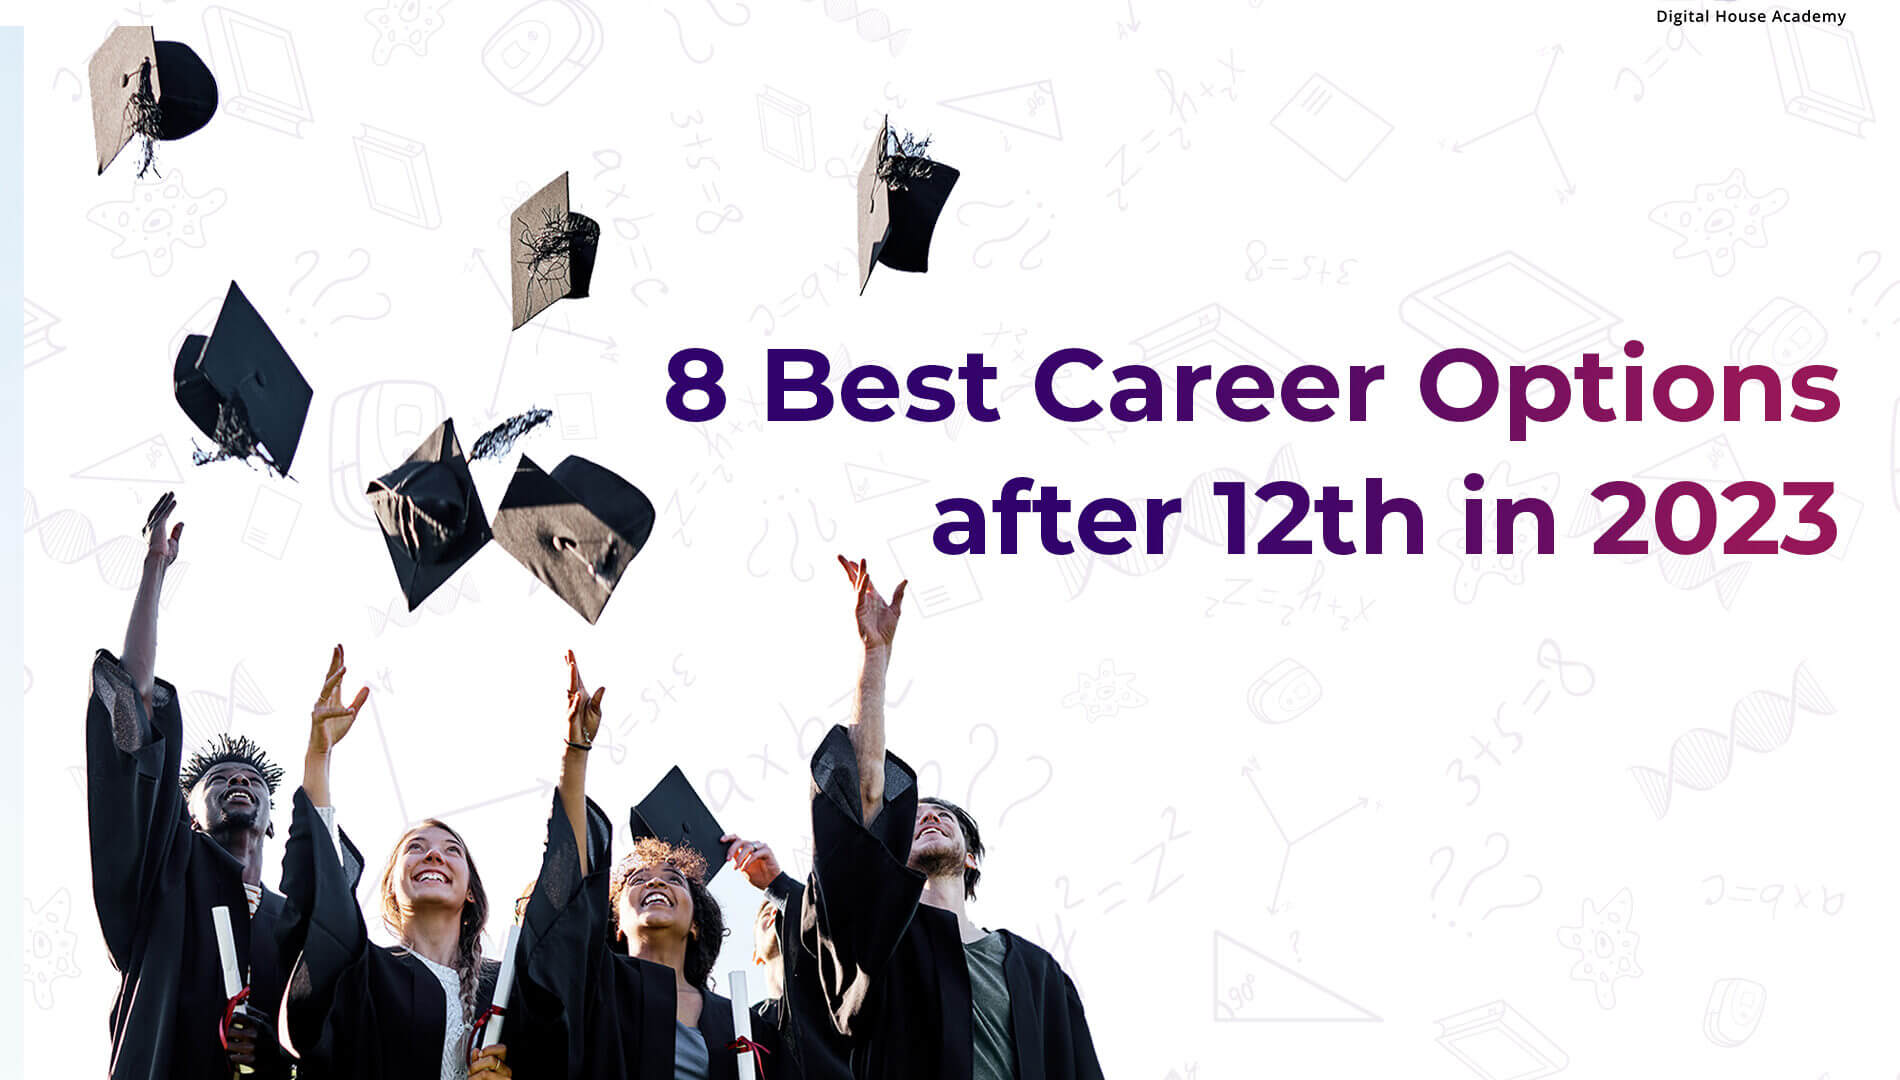 8 Best Career Options after 12th in 2023